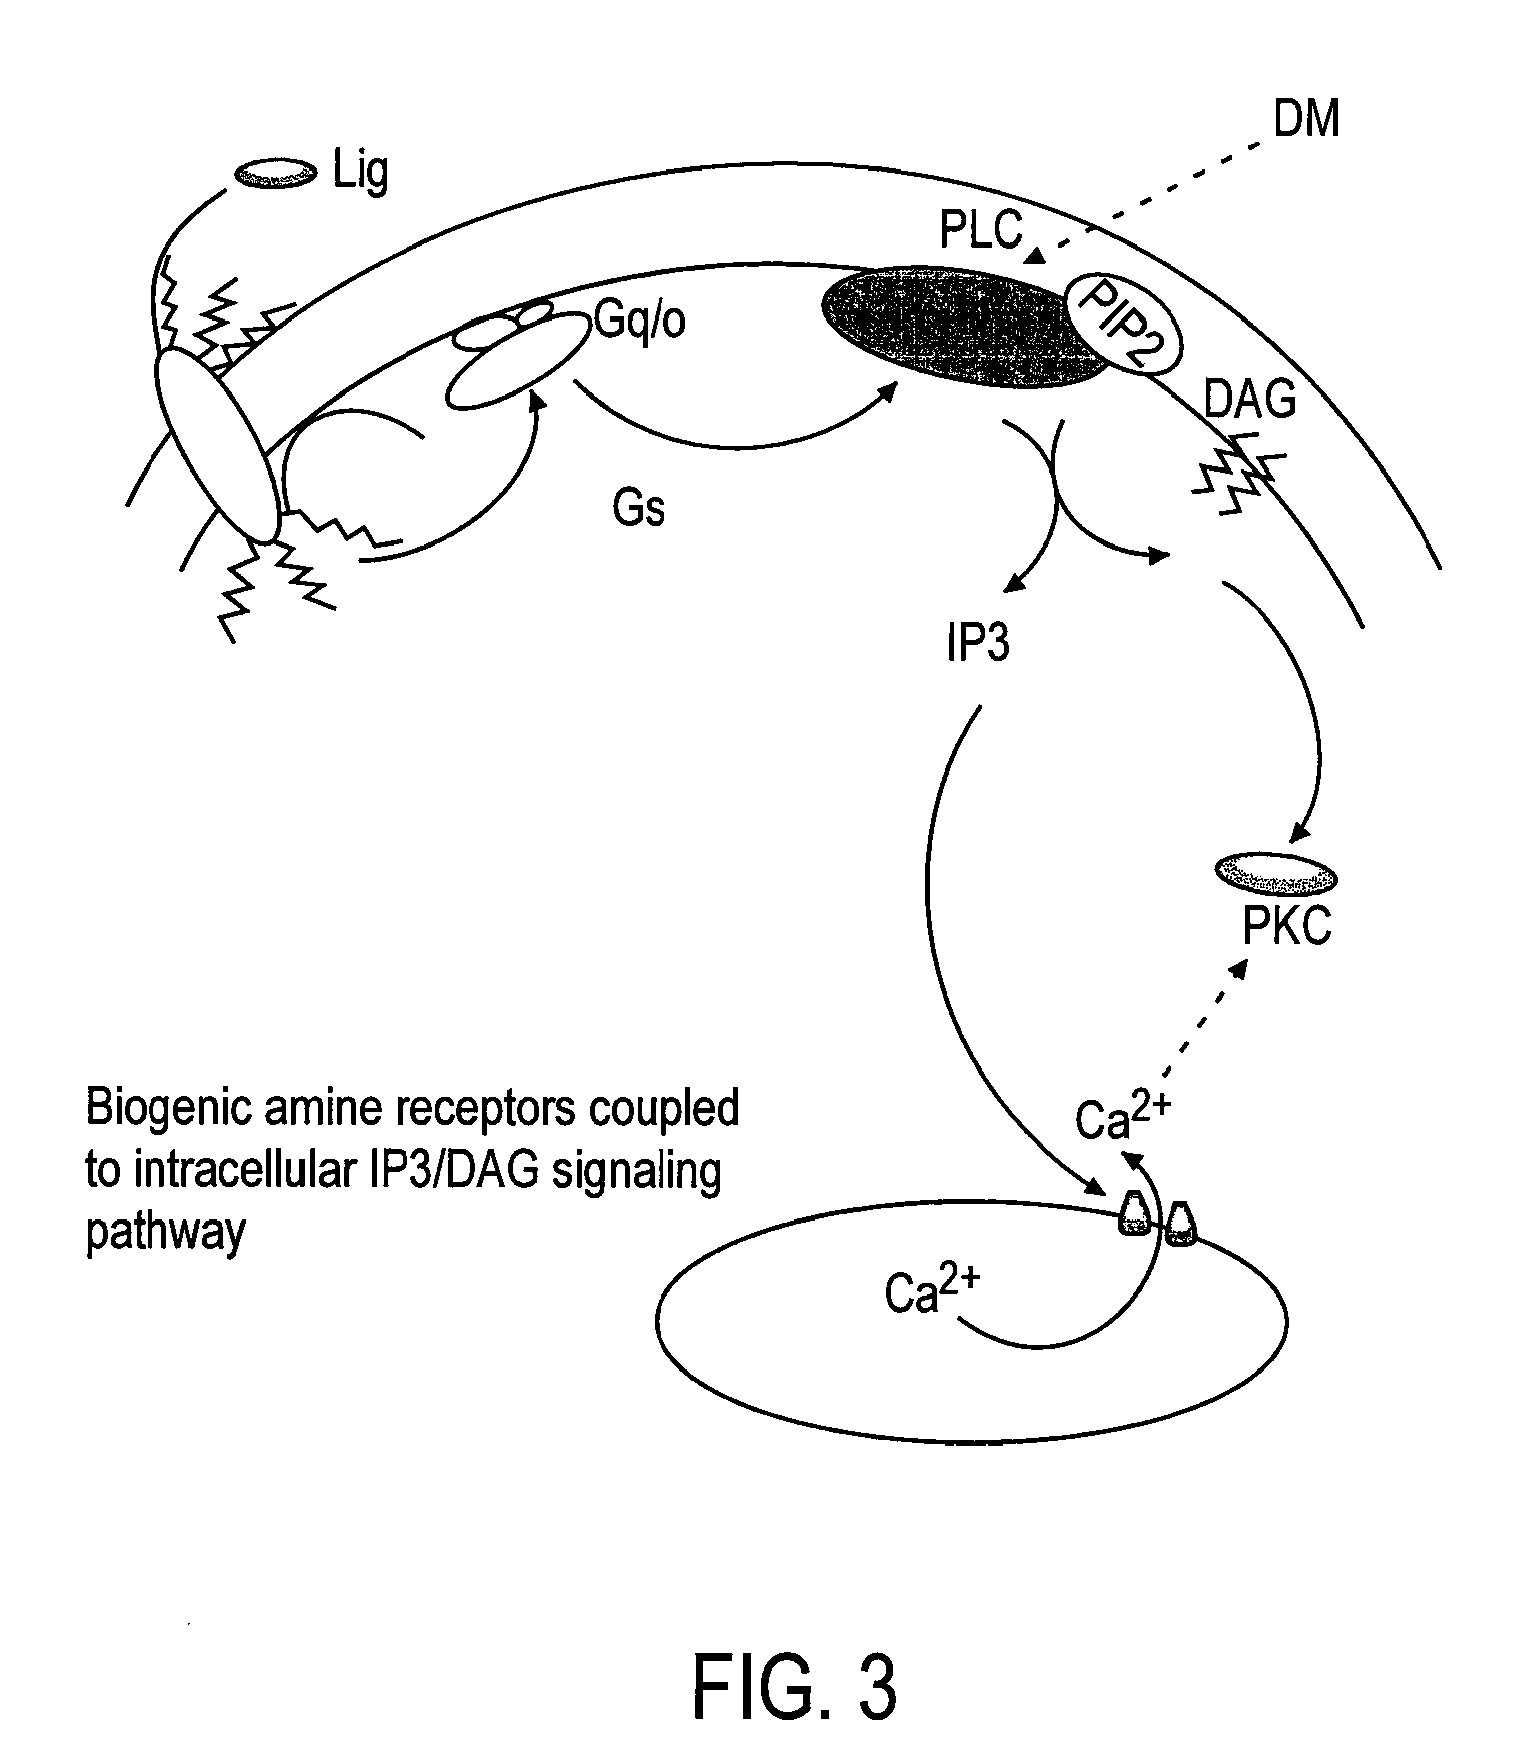 Pest control compositions and methods